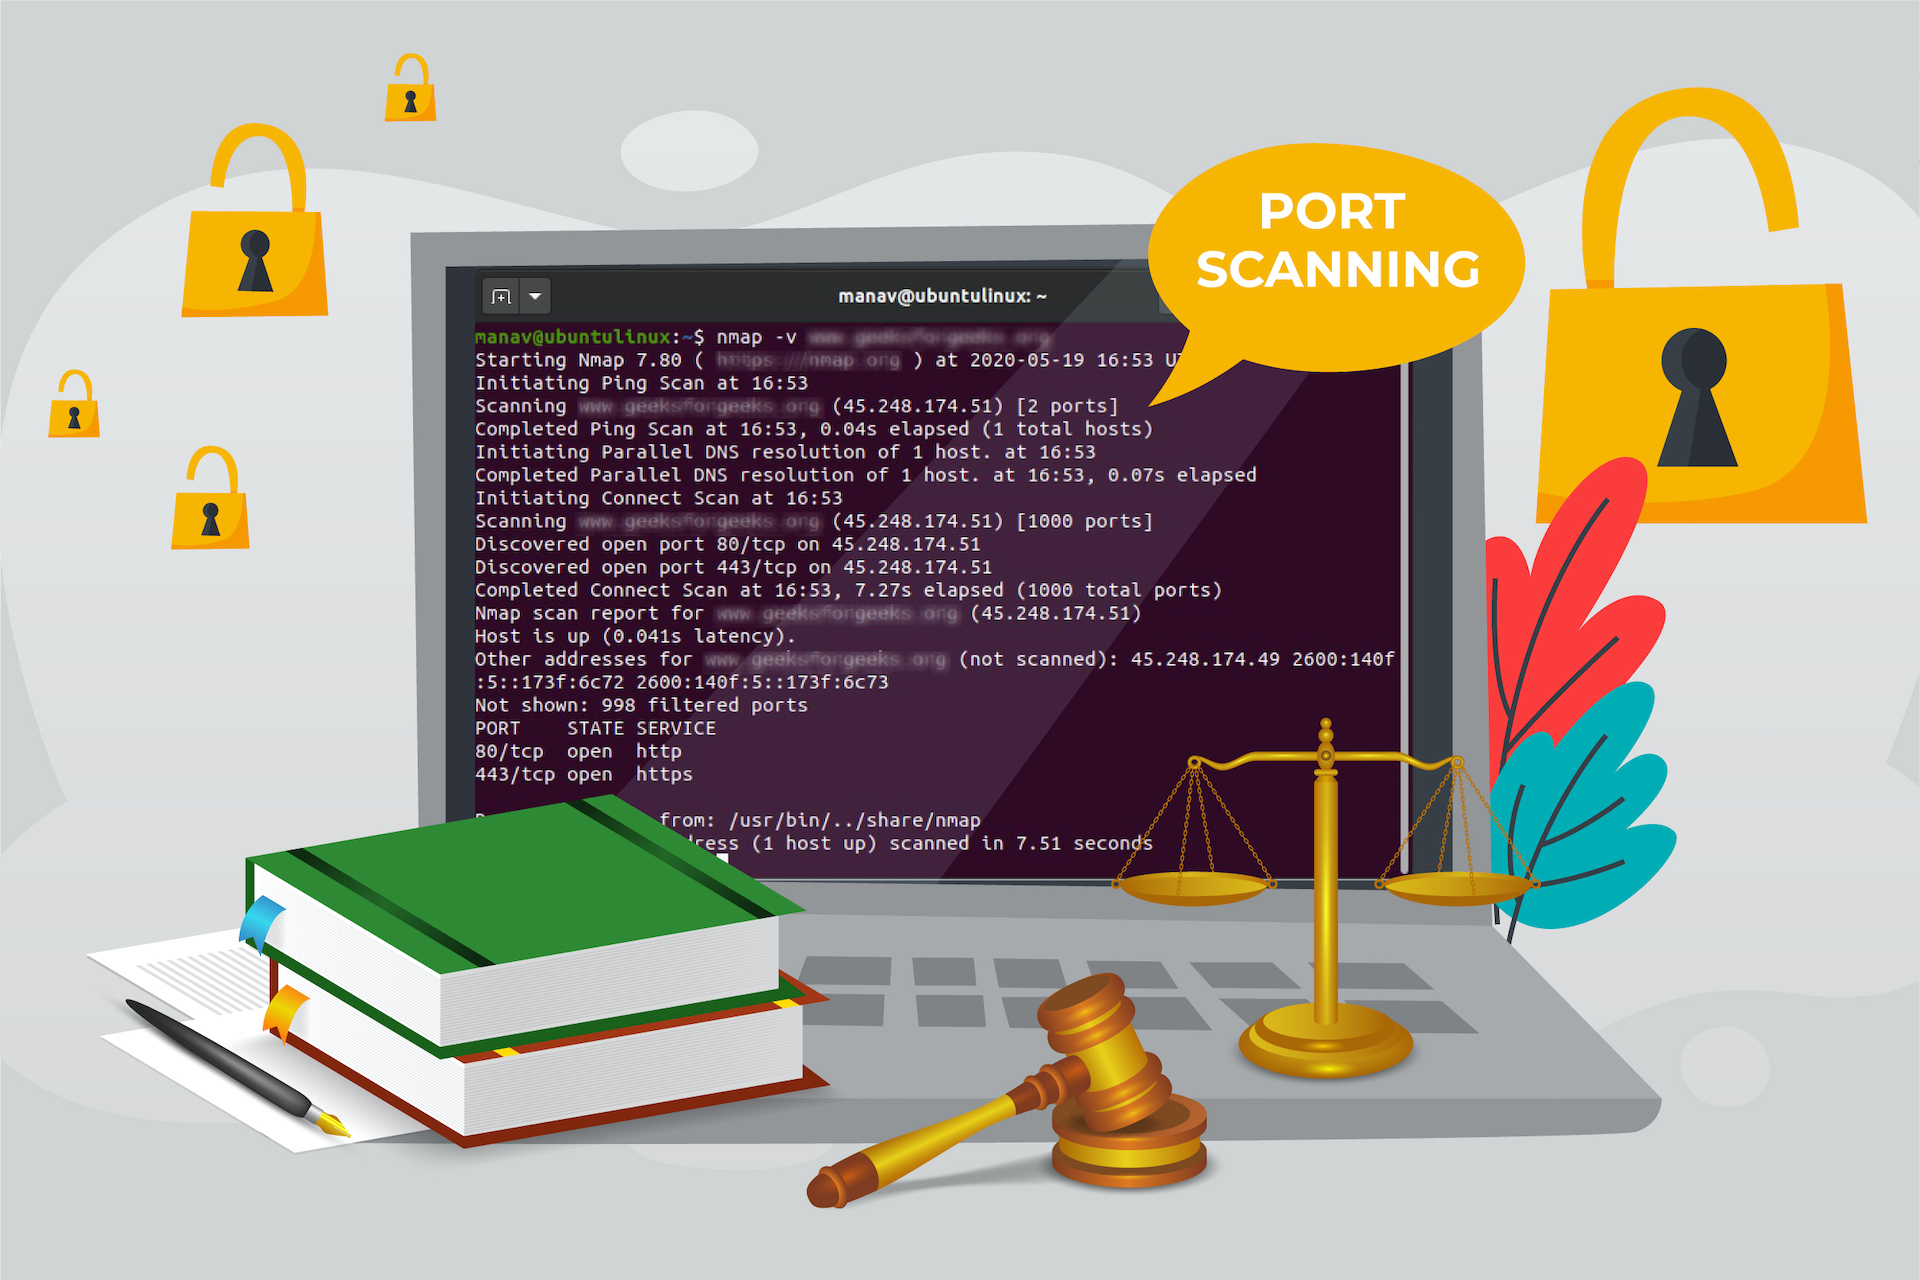 THE LEGALITY OF PORT SCANNING